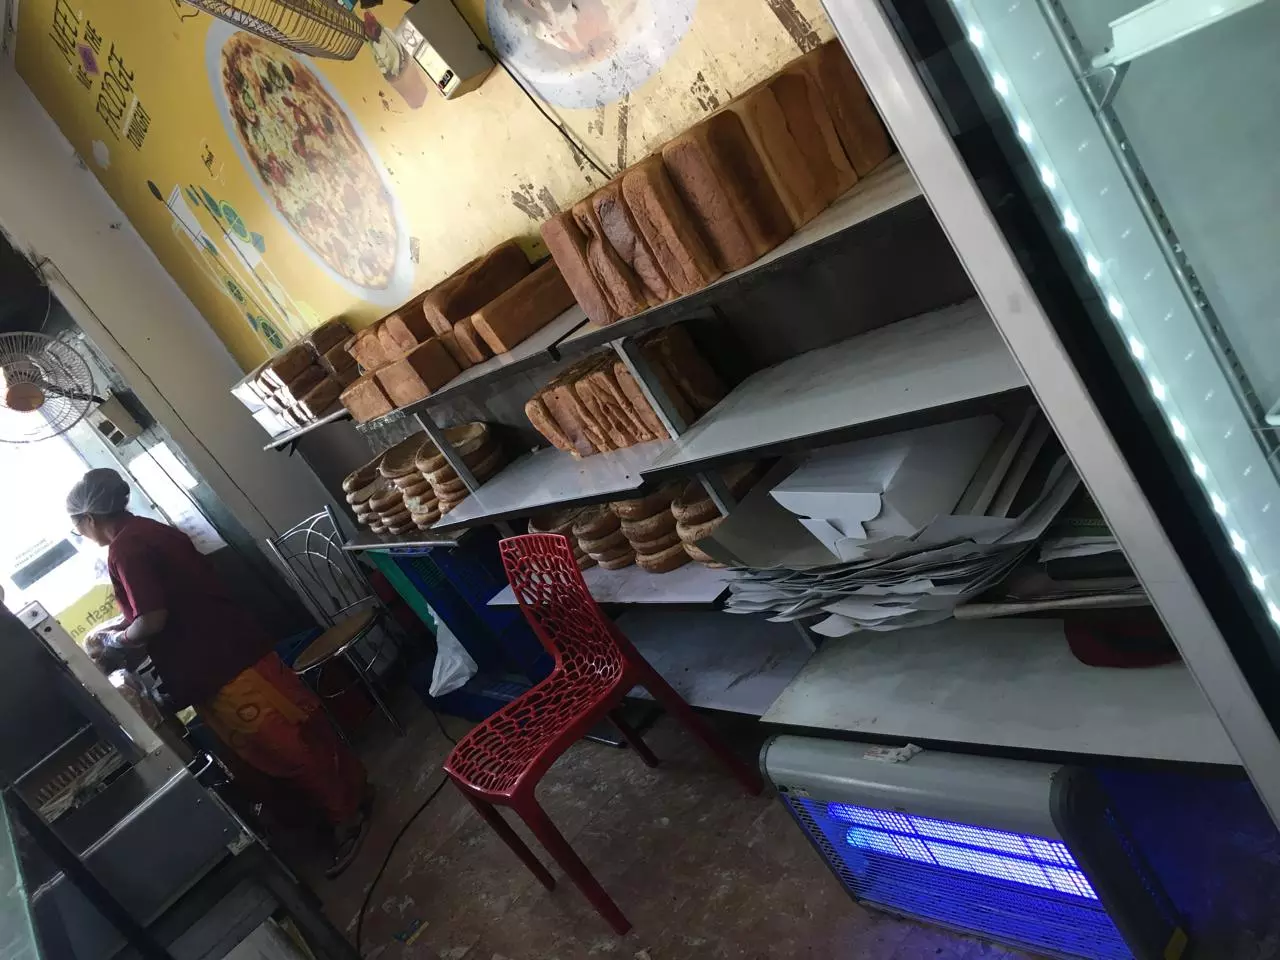 Several Hyderabad Eateries Selling Expired Items: Food Authority After Raids